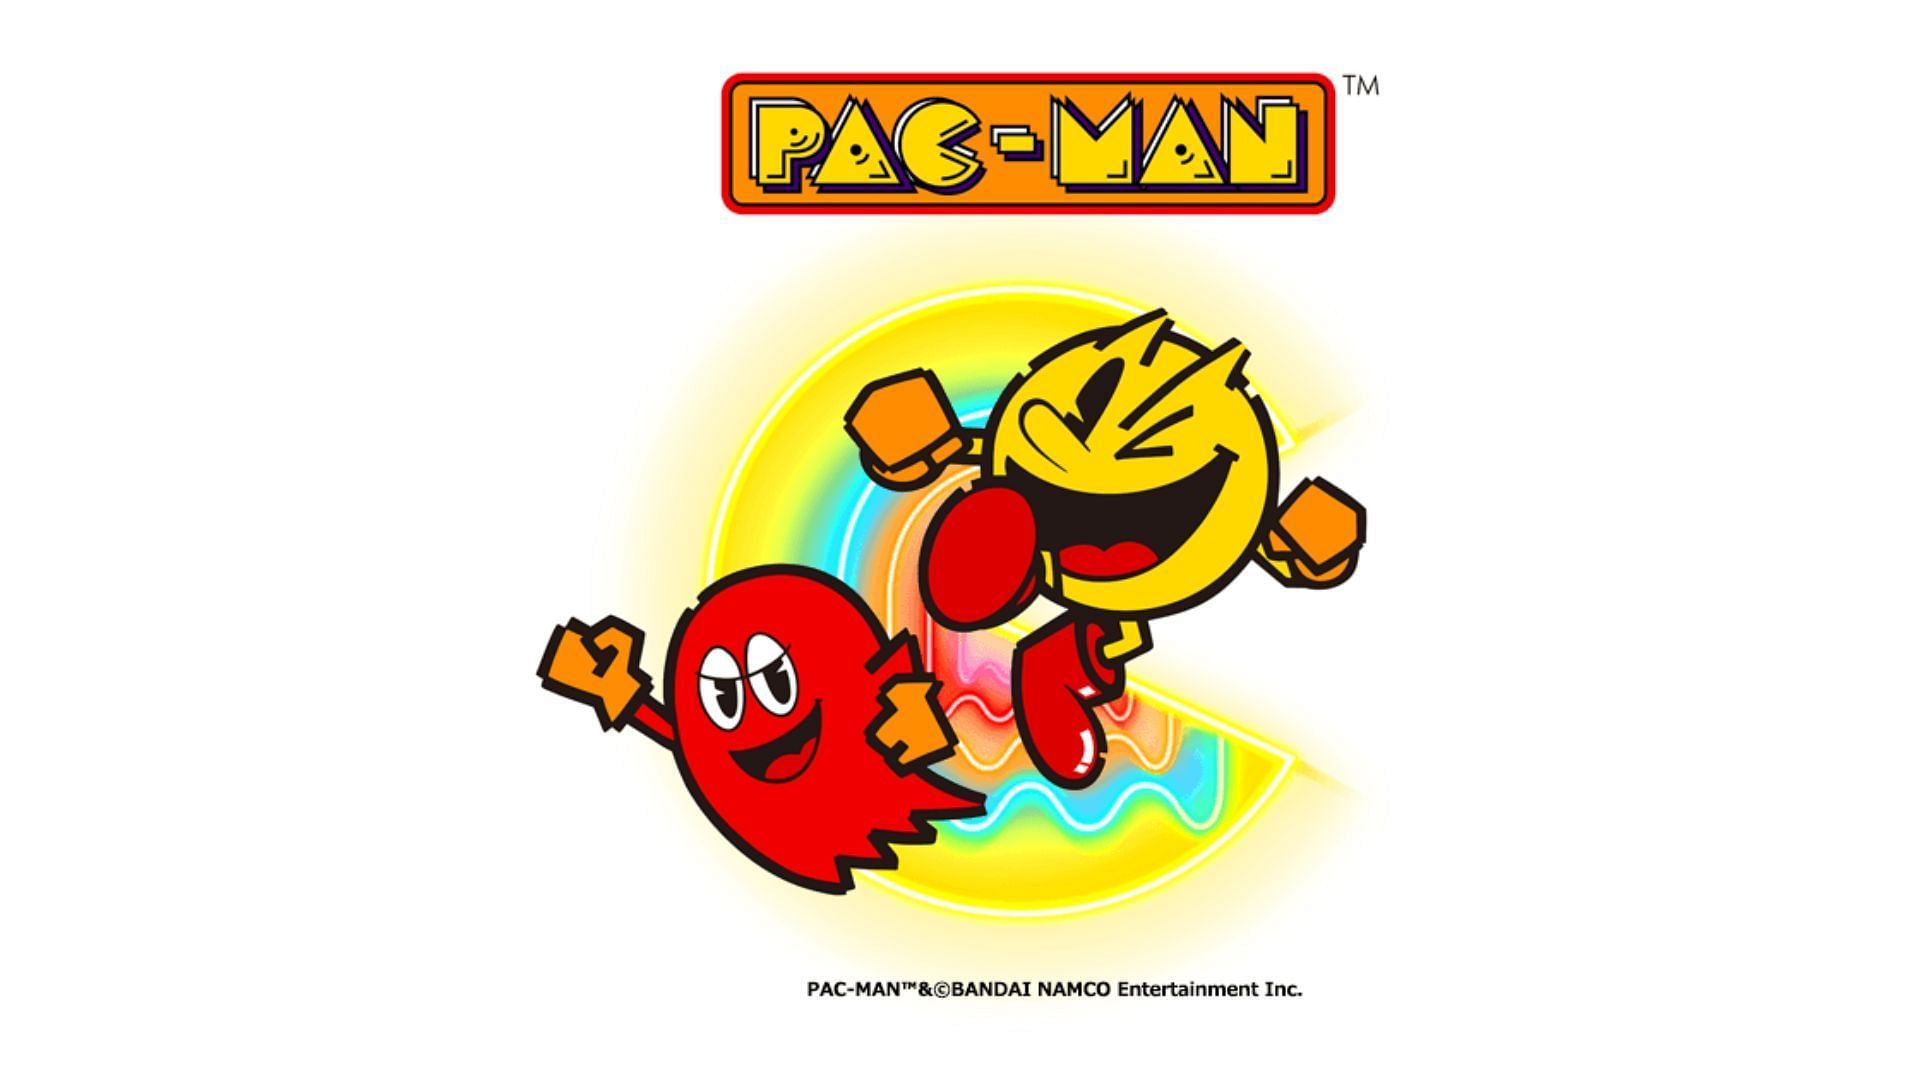 Pac-Man is a historical title. It should be respected as one of the best PC games. (Image via Namco)